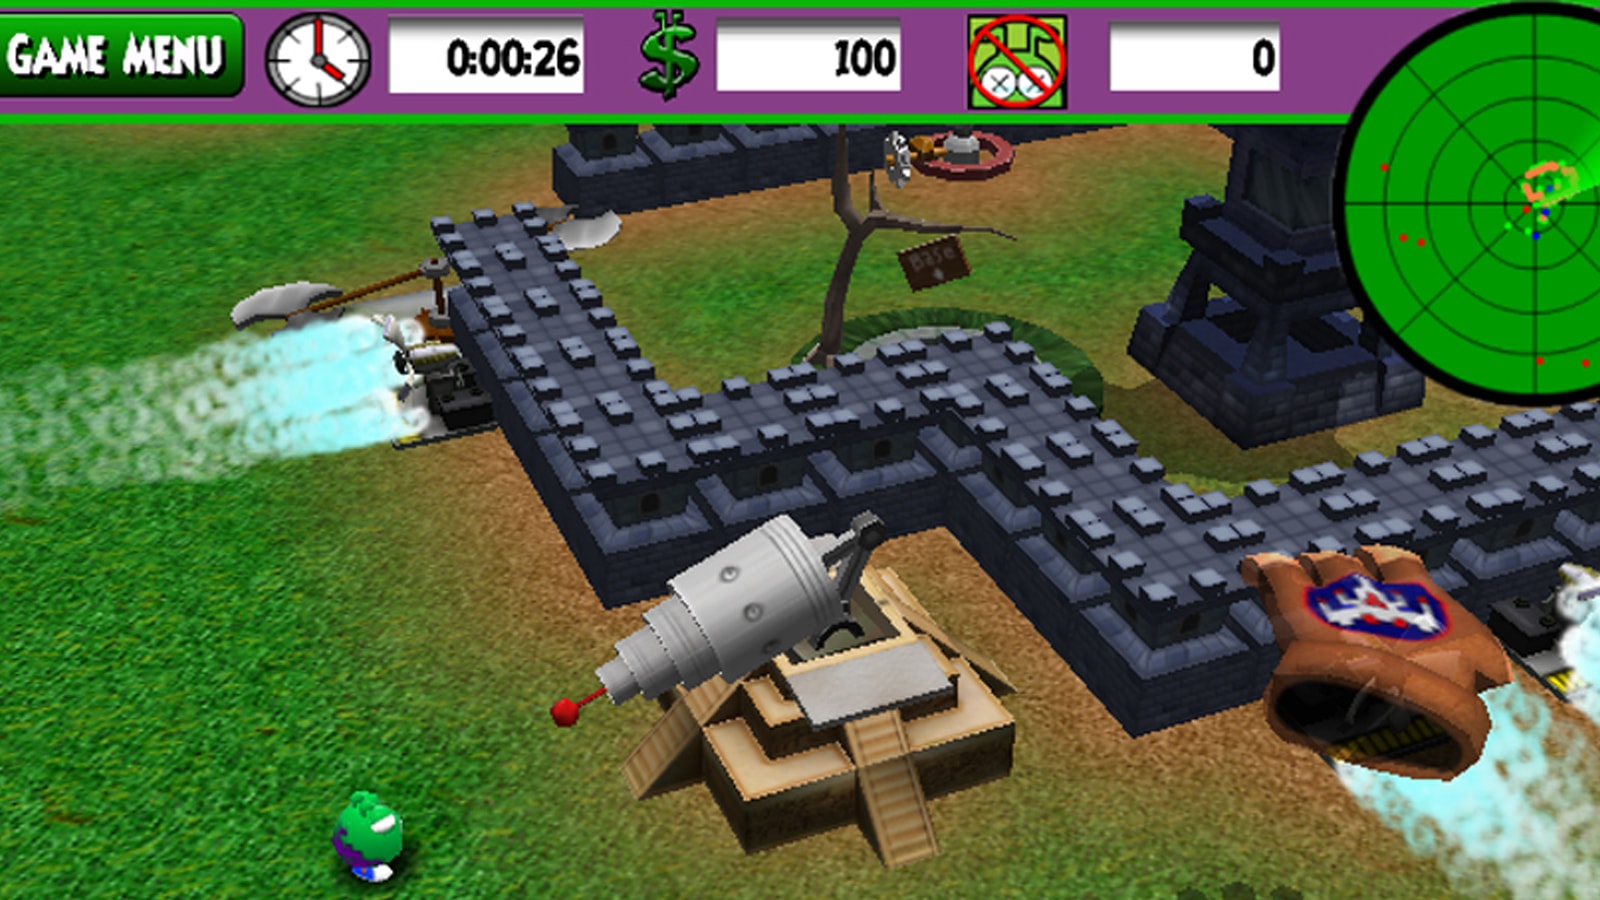 A ray gun atop a ziggurat points at a green invader, a spinning axe device in the background.